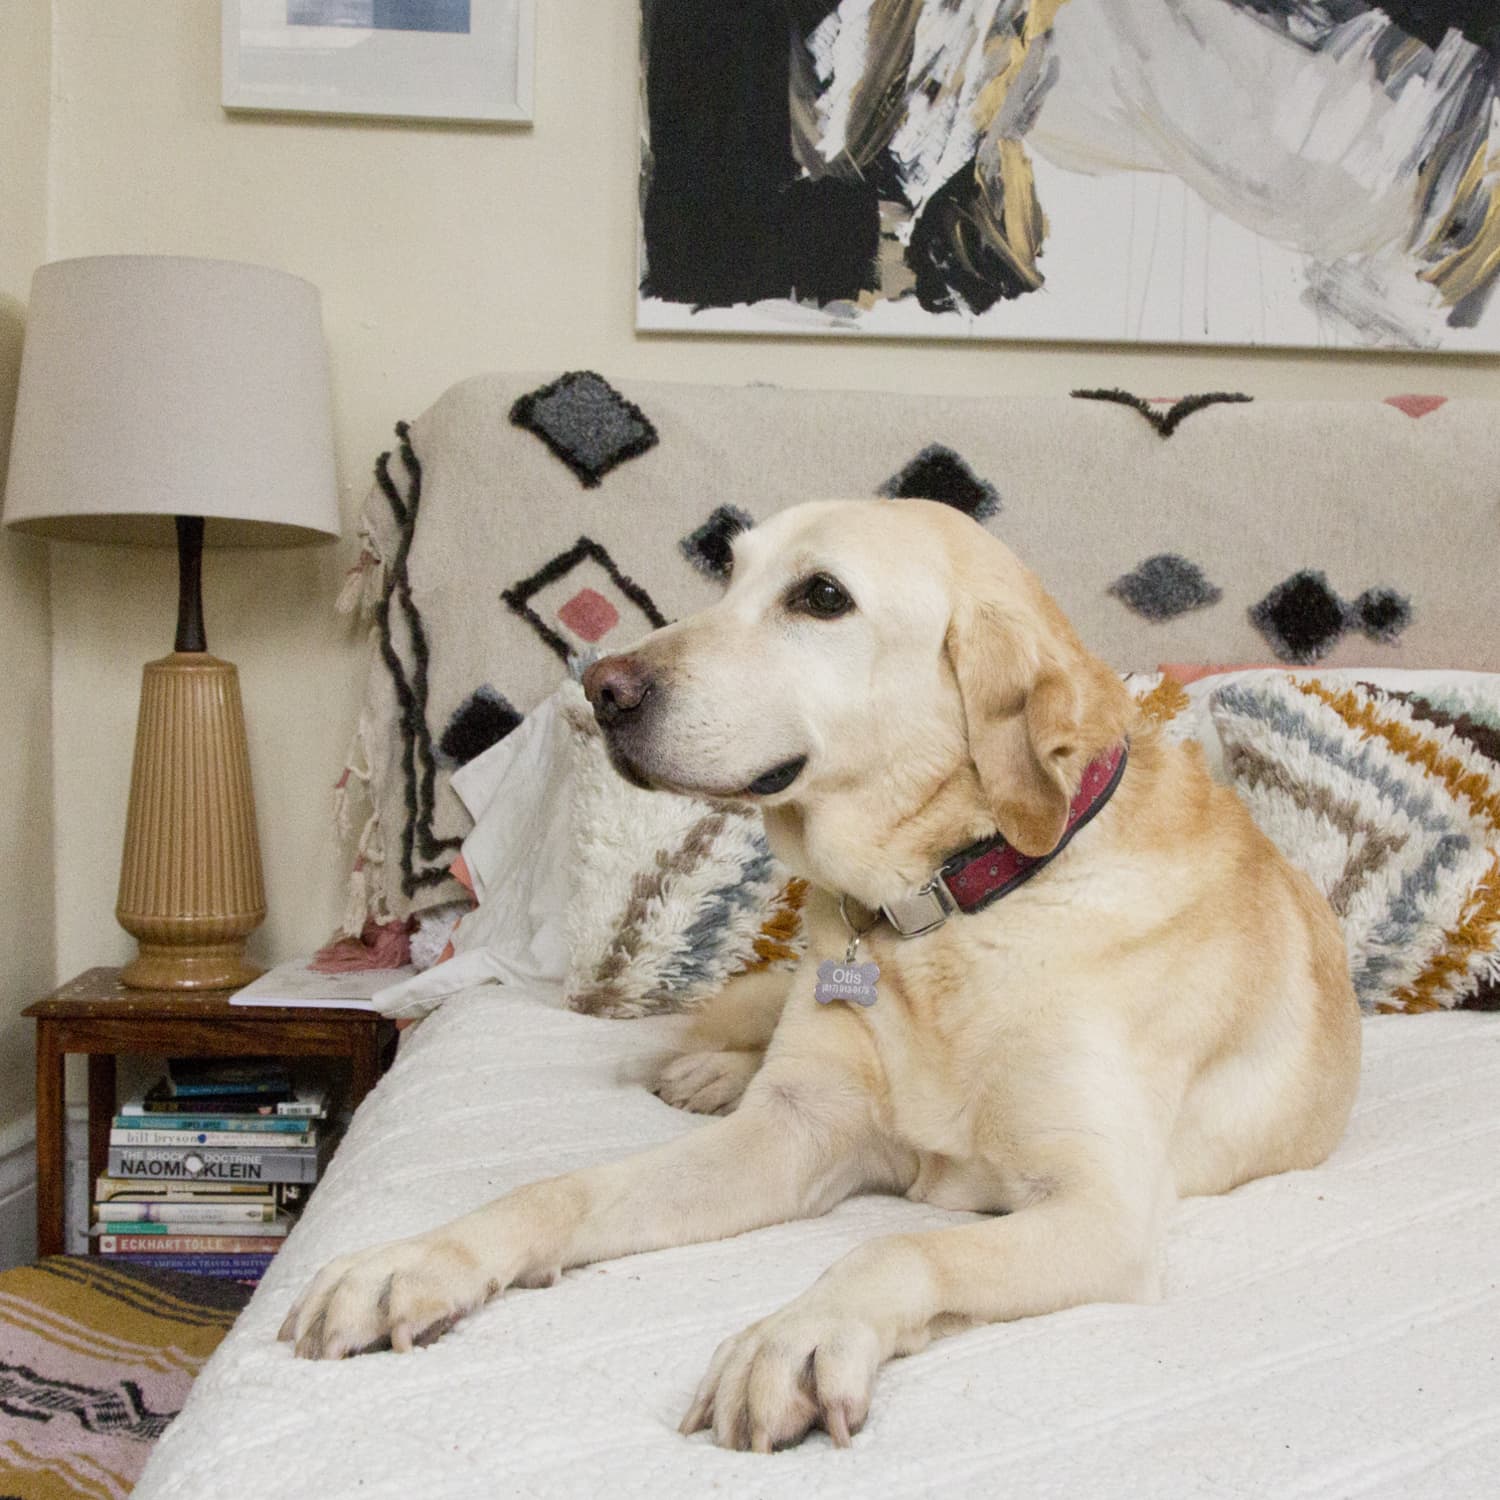 Labs are still America's favorite dog, but corgis have wiggled